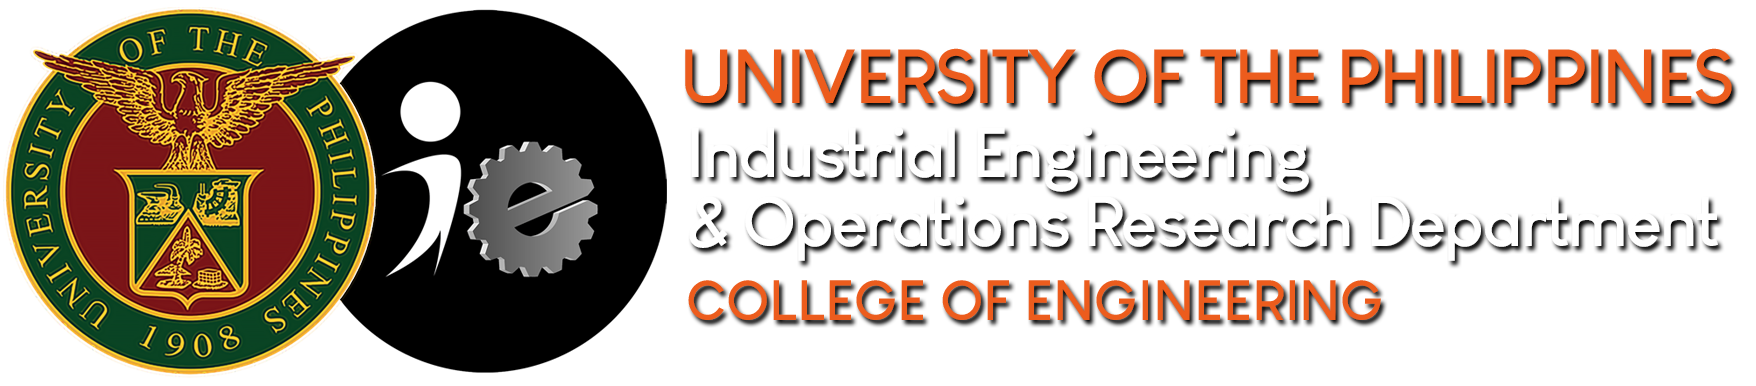 UPD Department of Industrial Engineering and Operations Research